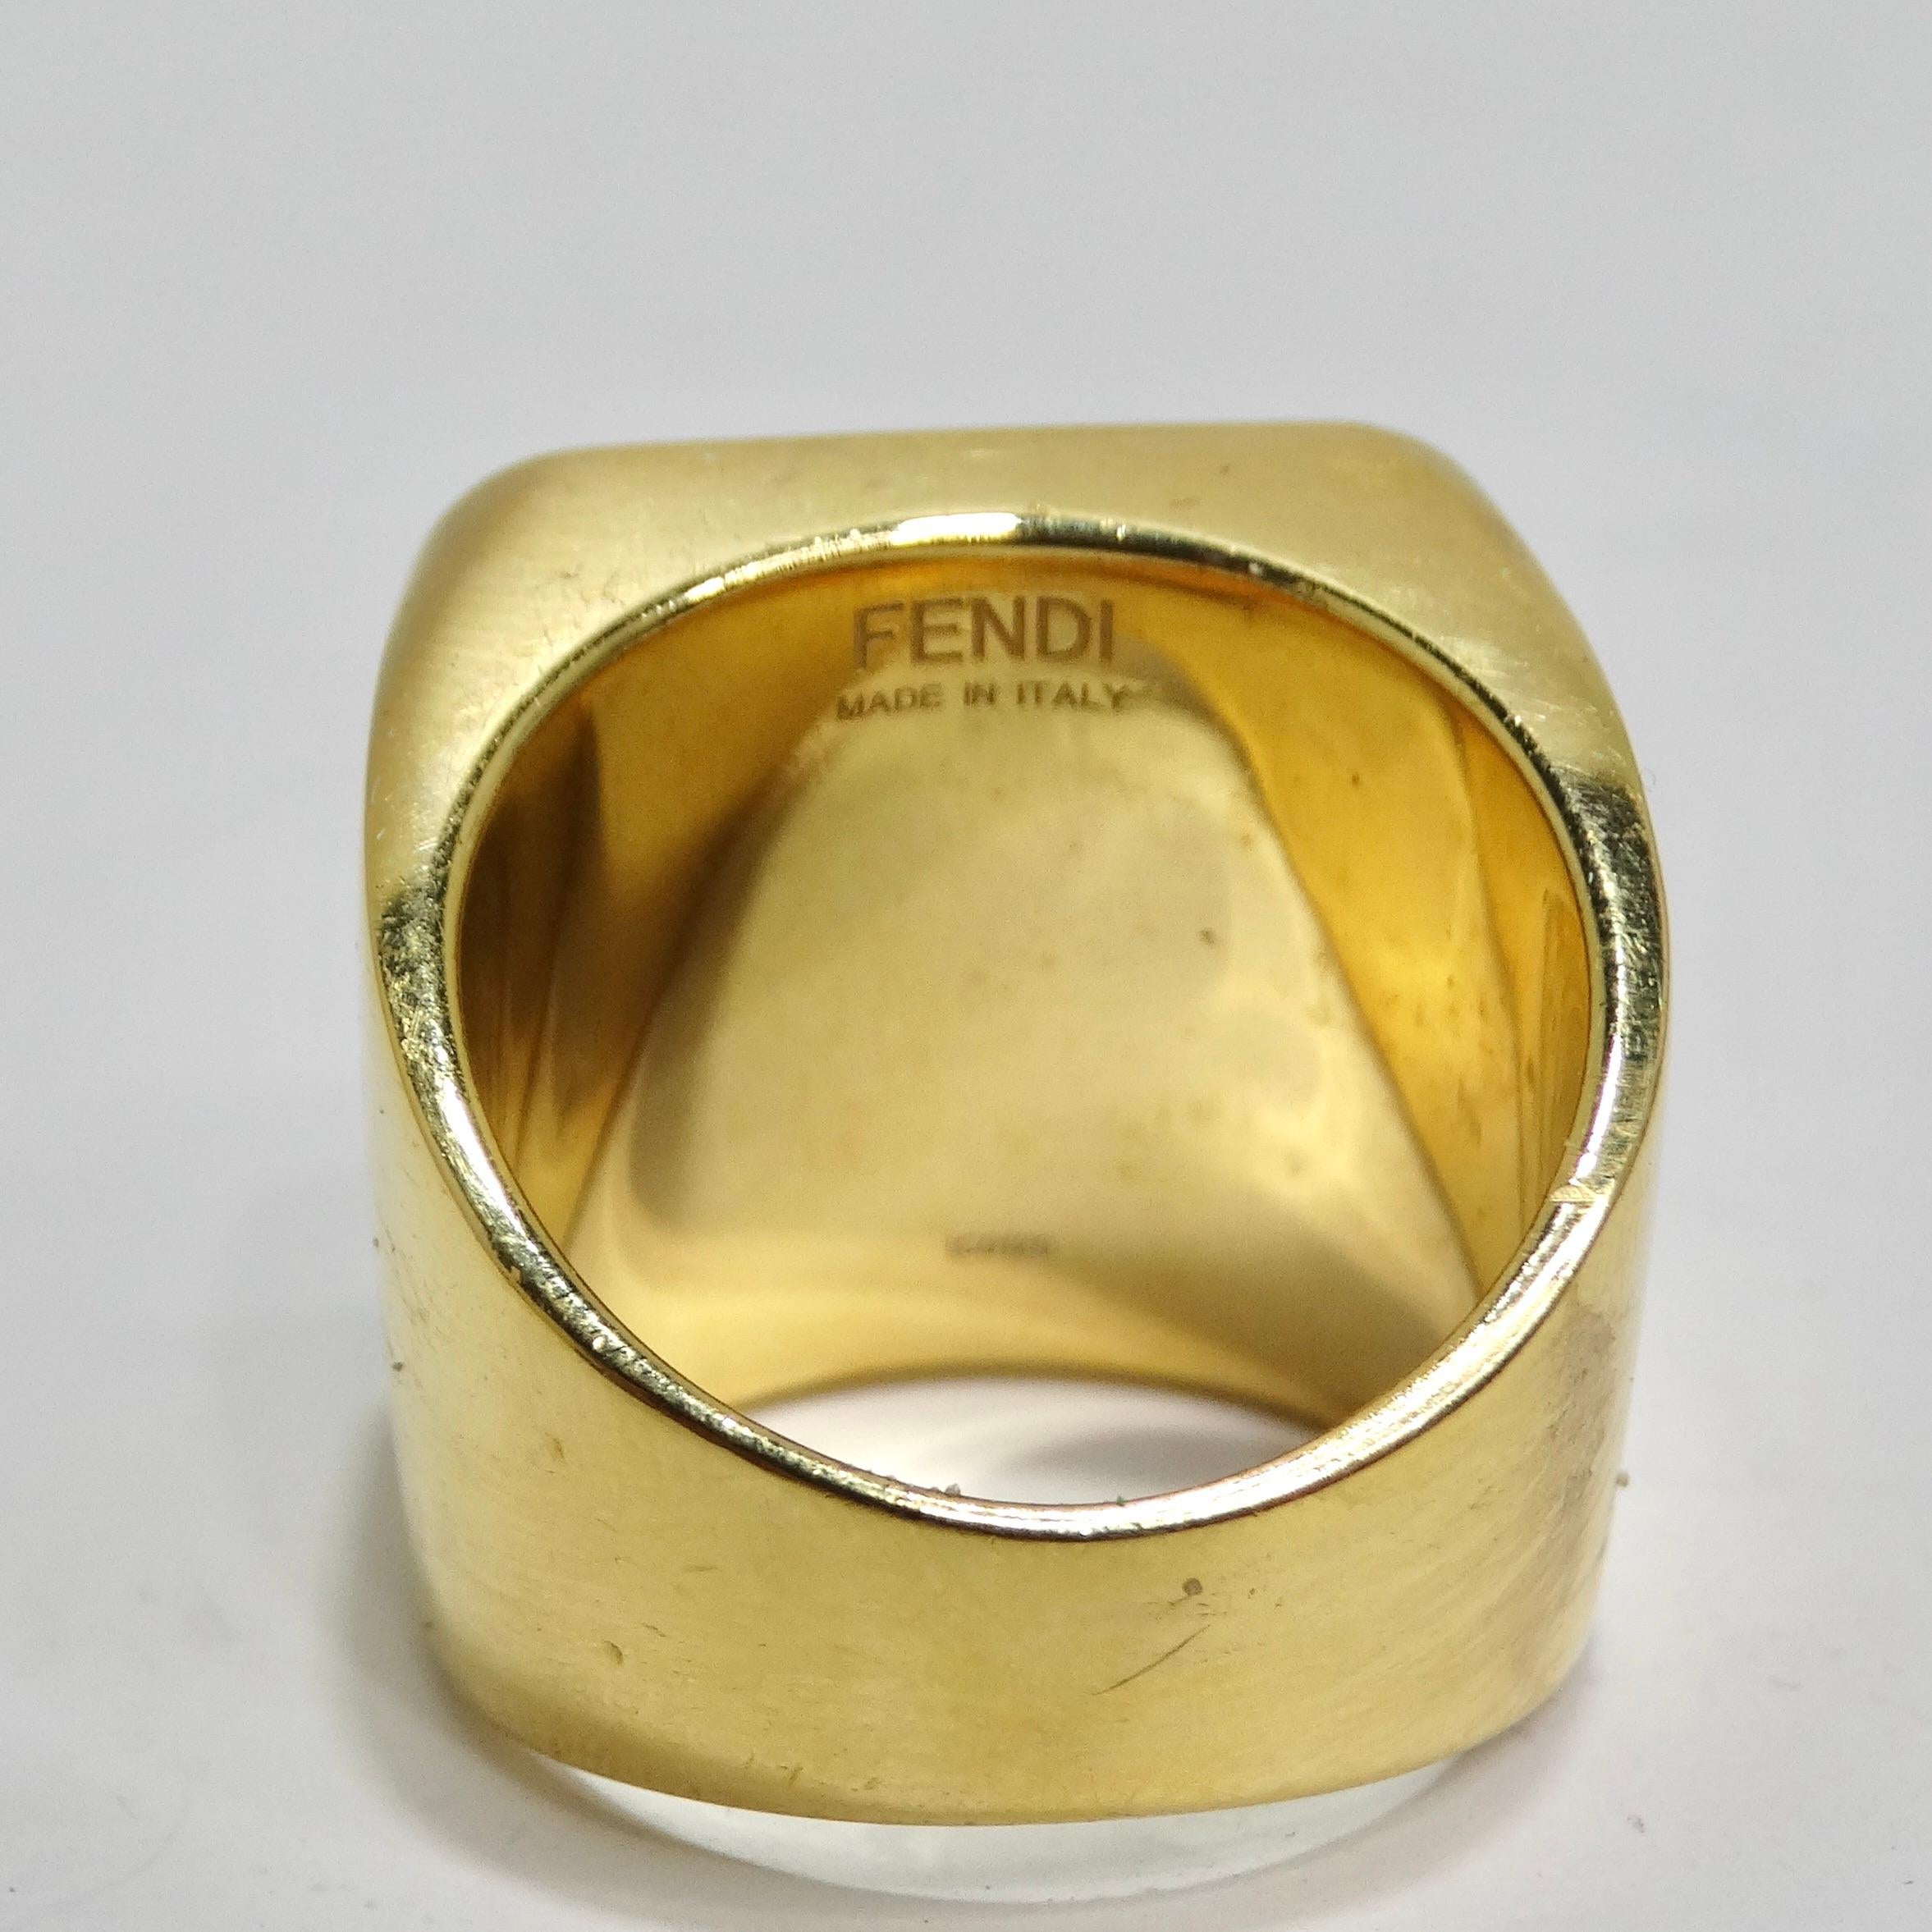 Fendi FF Logo Gold Tone Ring In Good Condition For Sale In Scottsdale, AZ